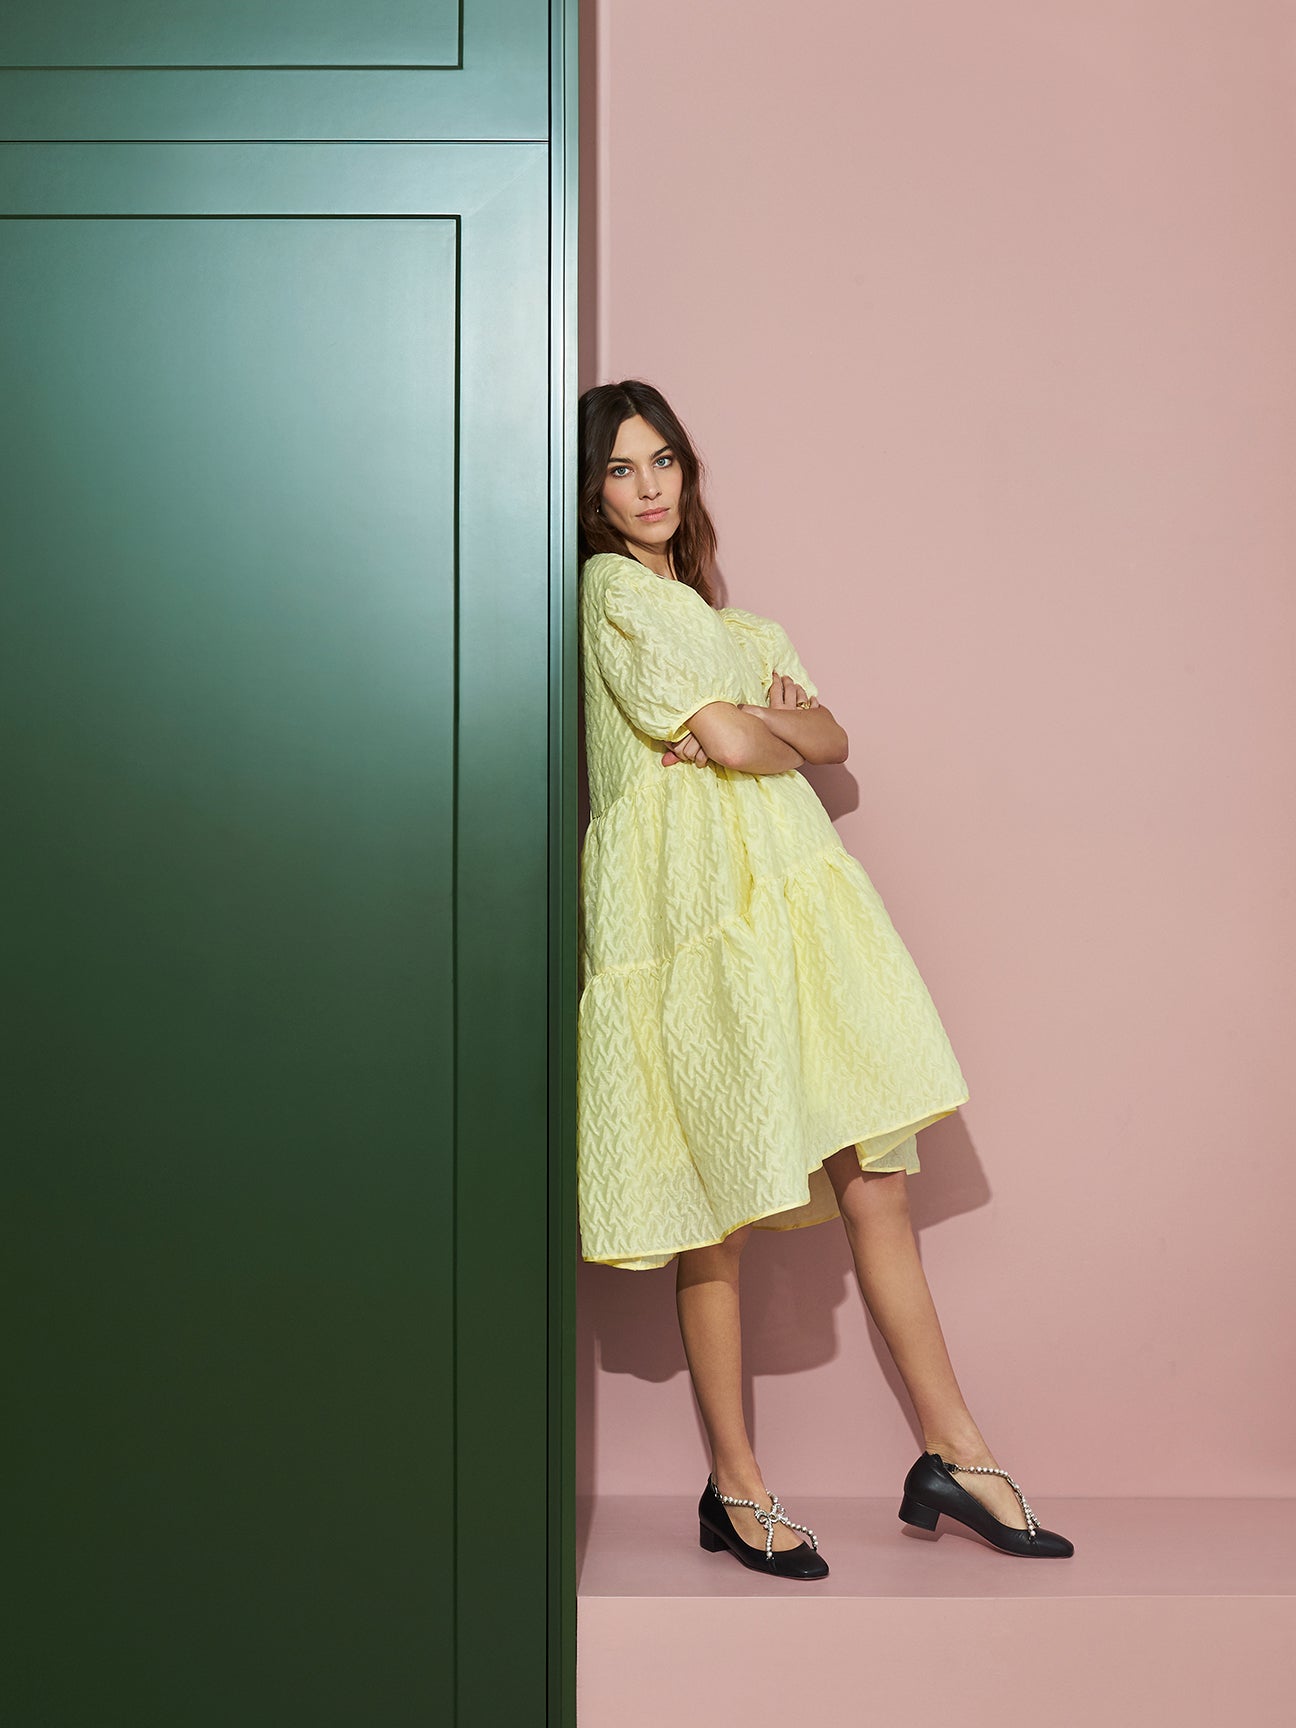 Alexa Chung leaning against a green cabinet